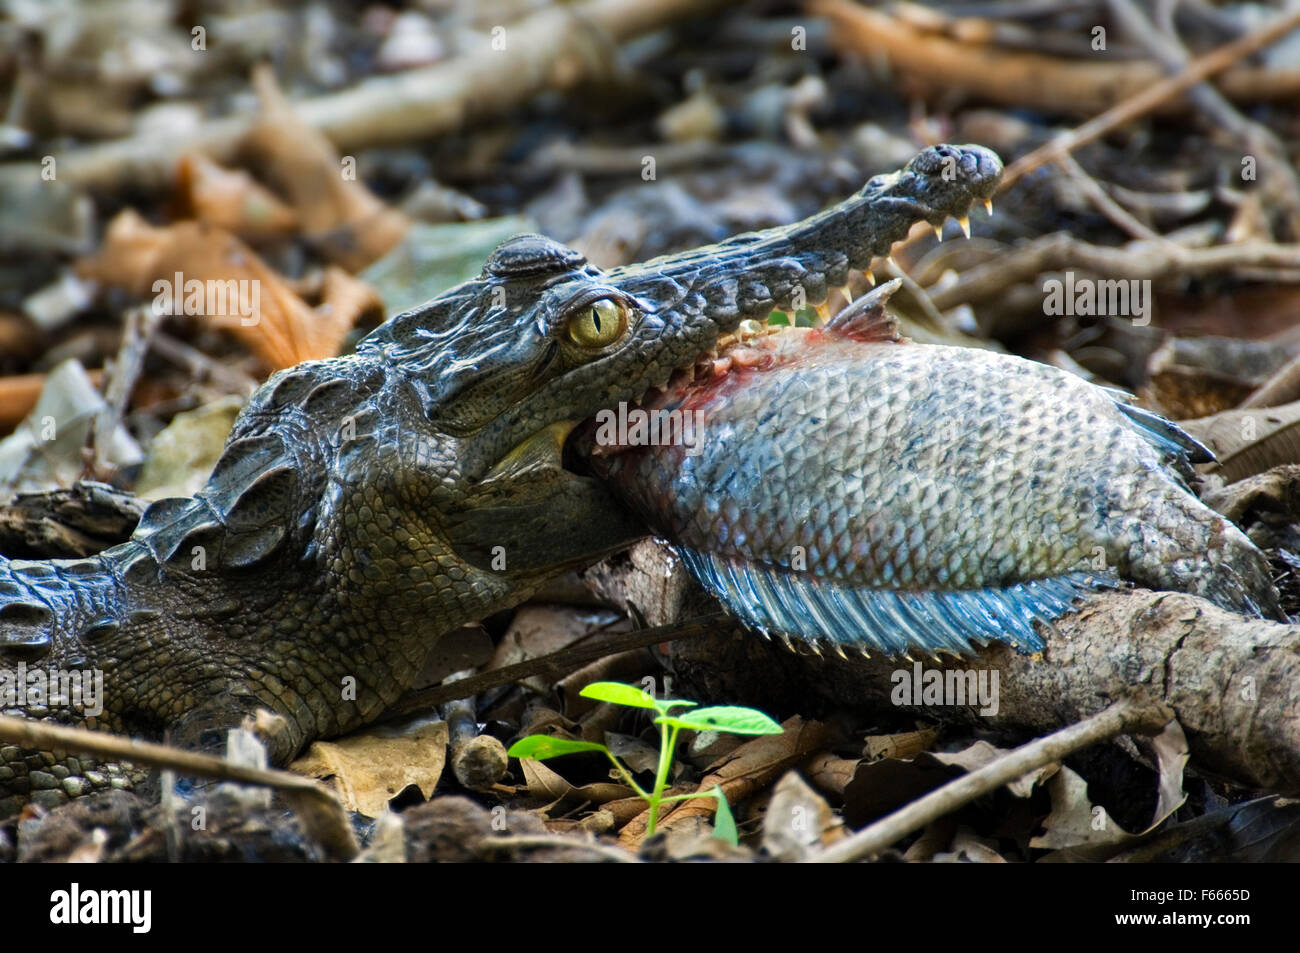 Young spectacled caiman / white caiman / common caiman (Caiman crocodilus) swallowing fish, Costa Rica Stock Photo